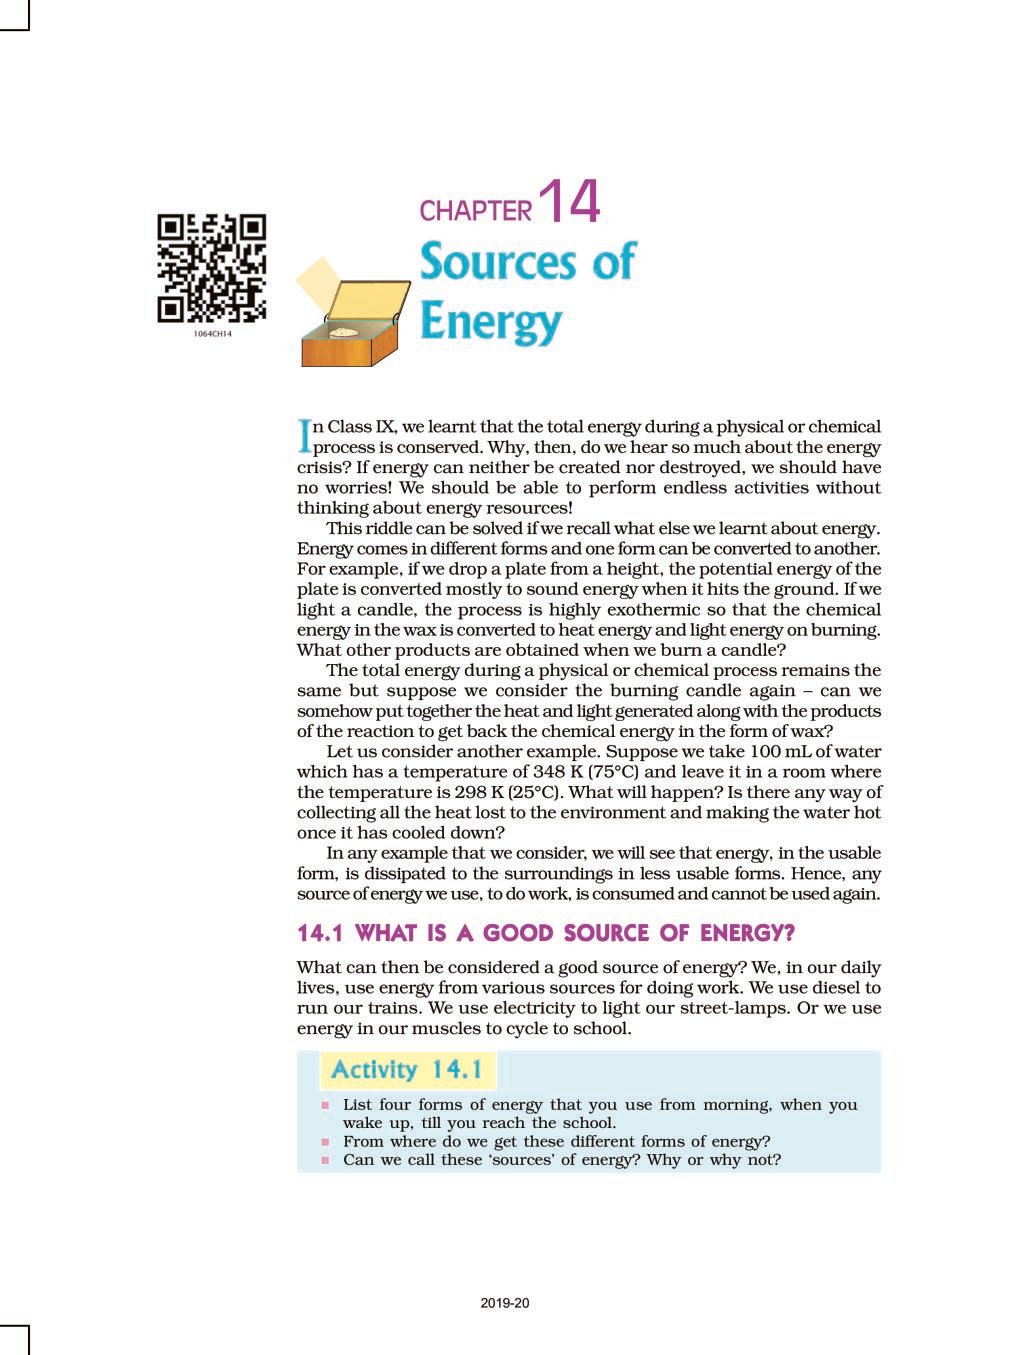 NCERT Book Class 10 Science Chapter 14 Sources of Energy - Page 1